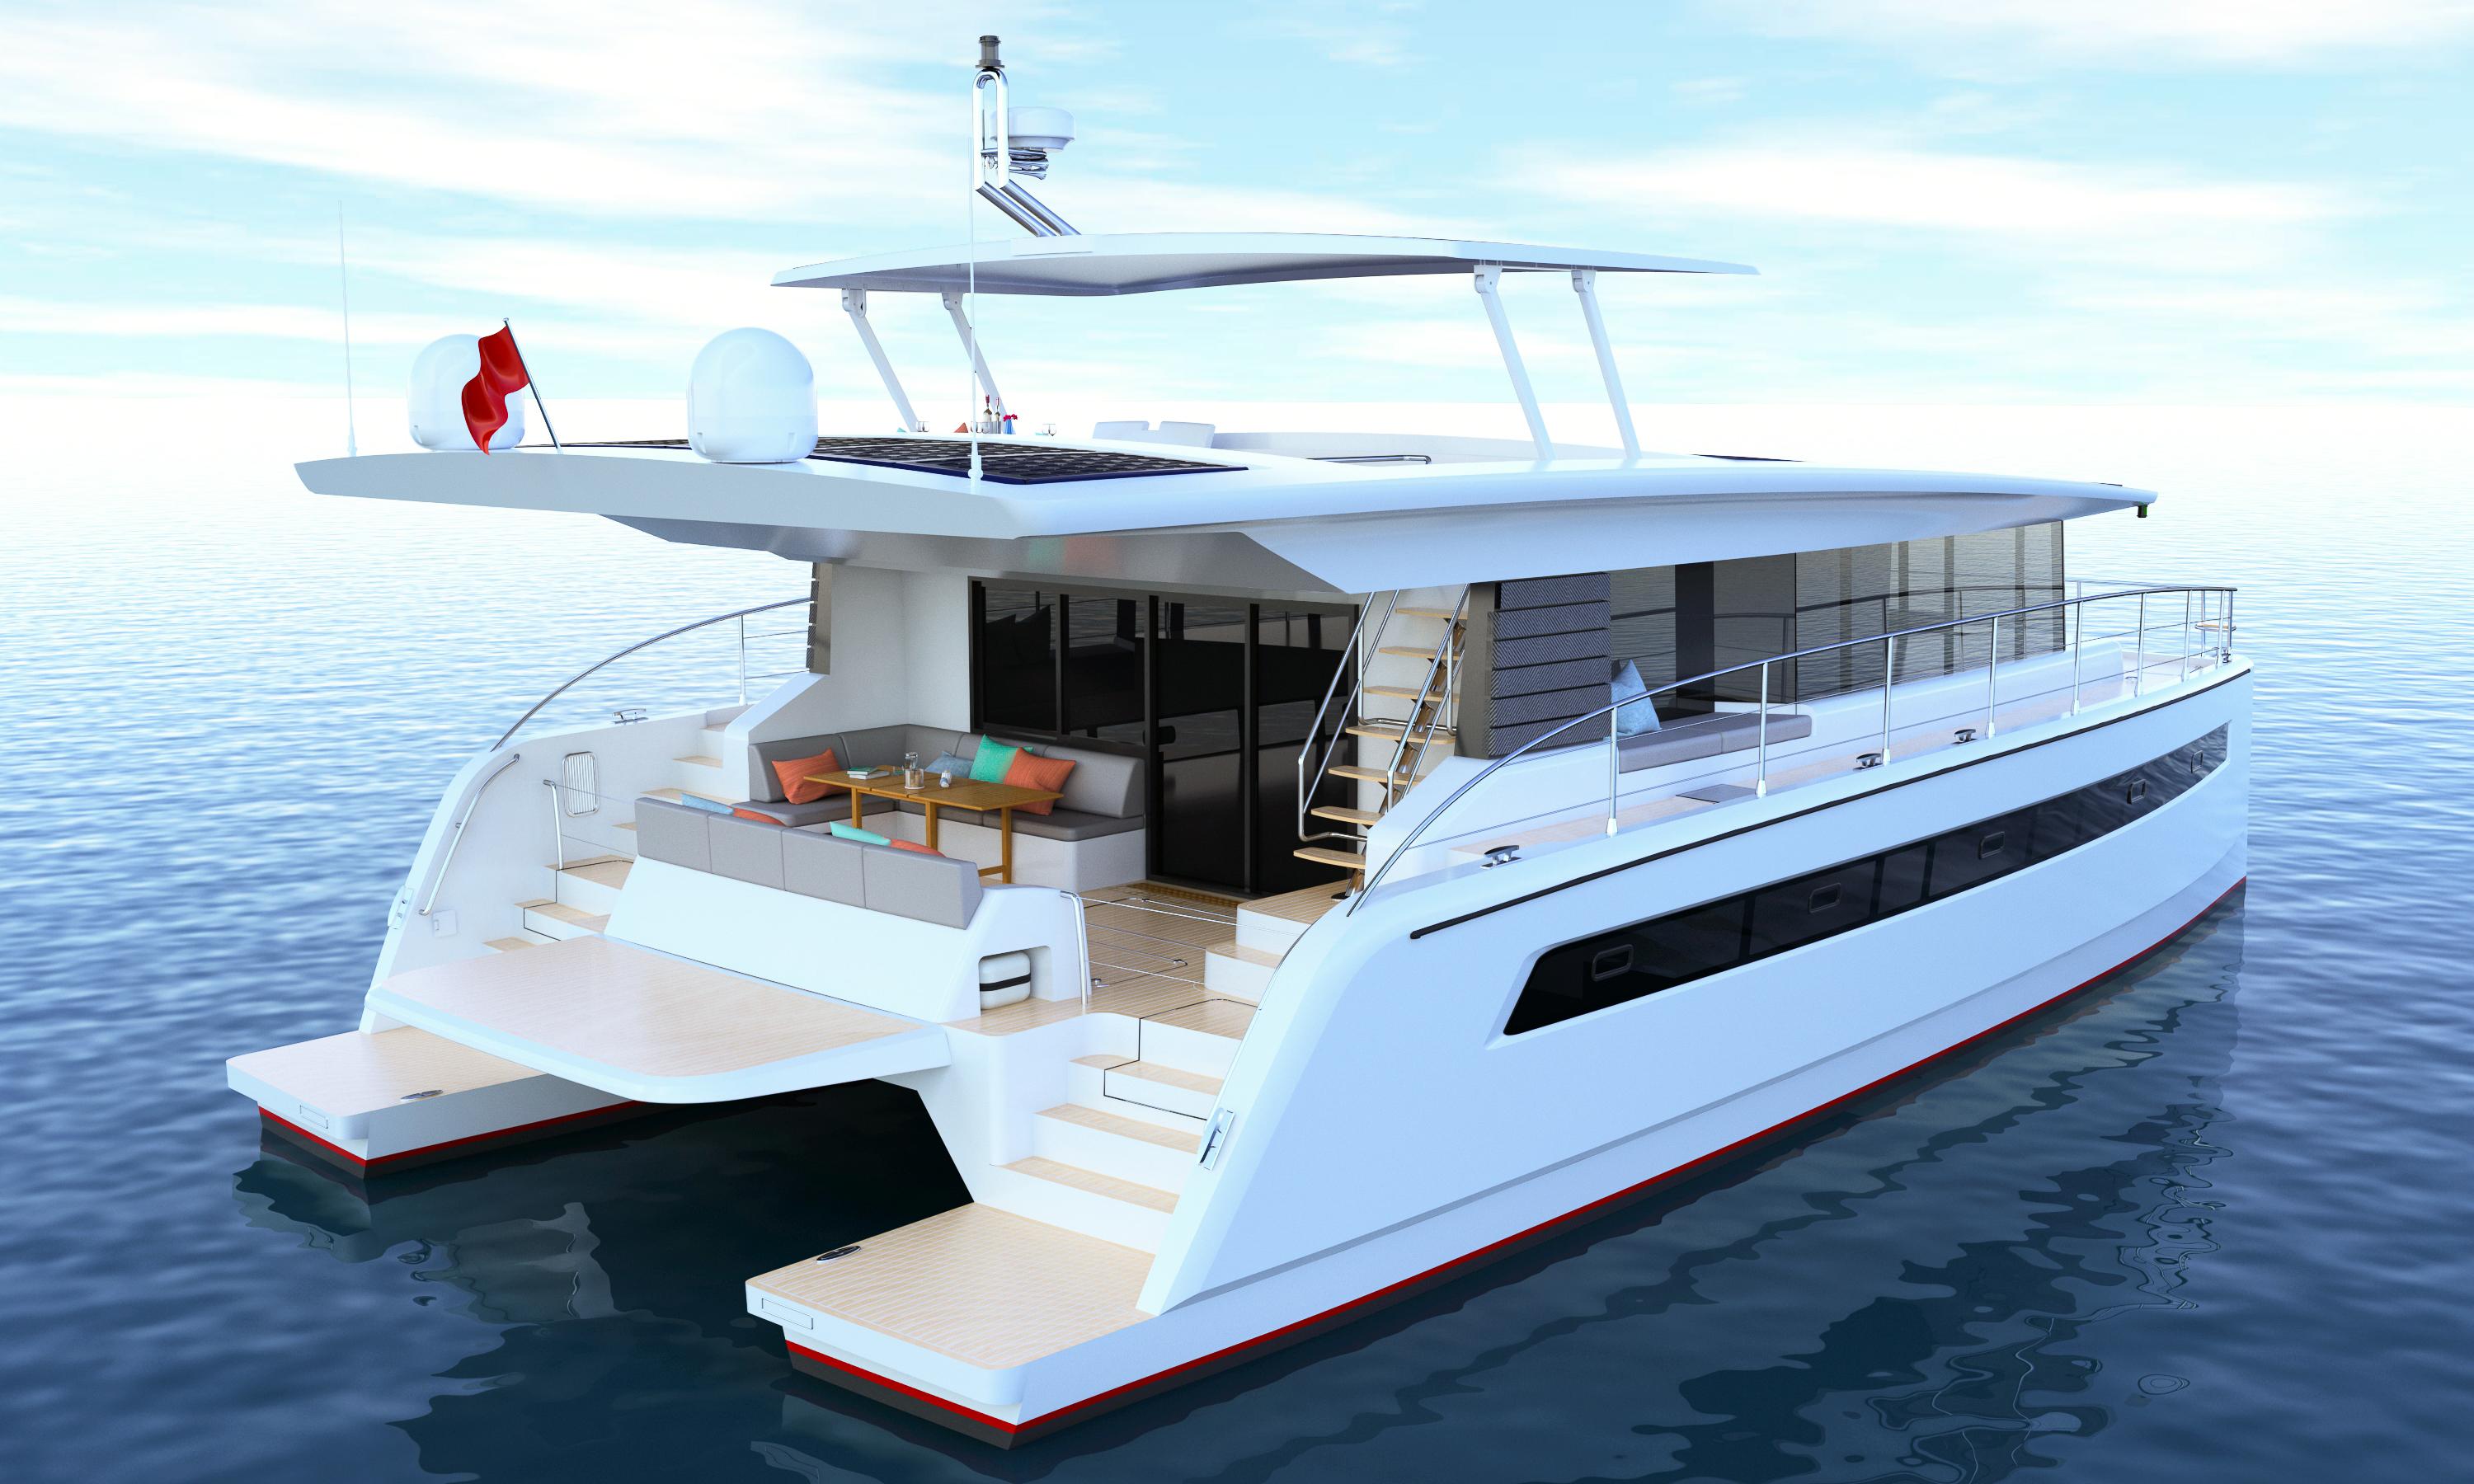 silent yachts 60 price